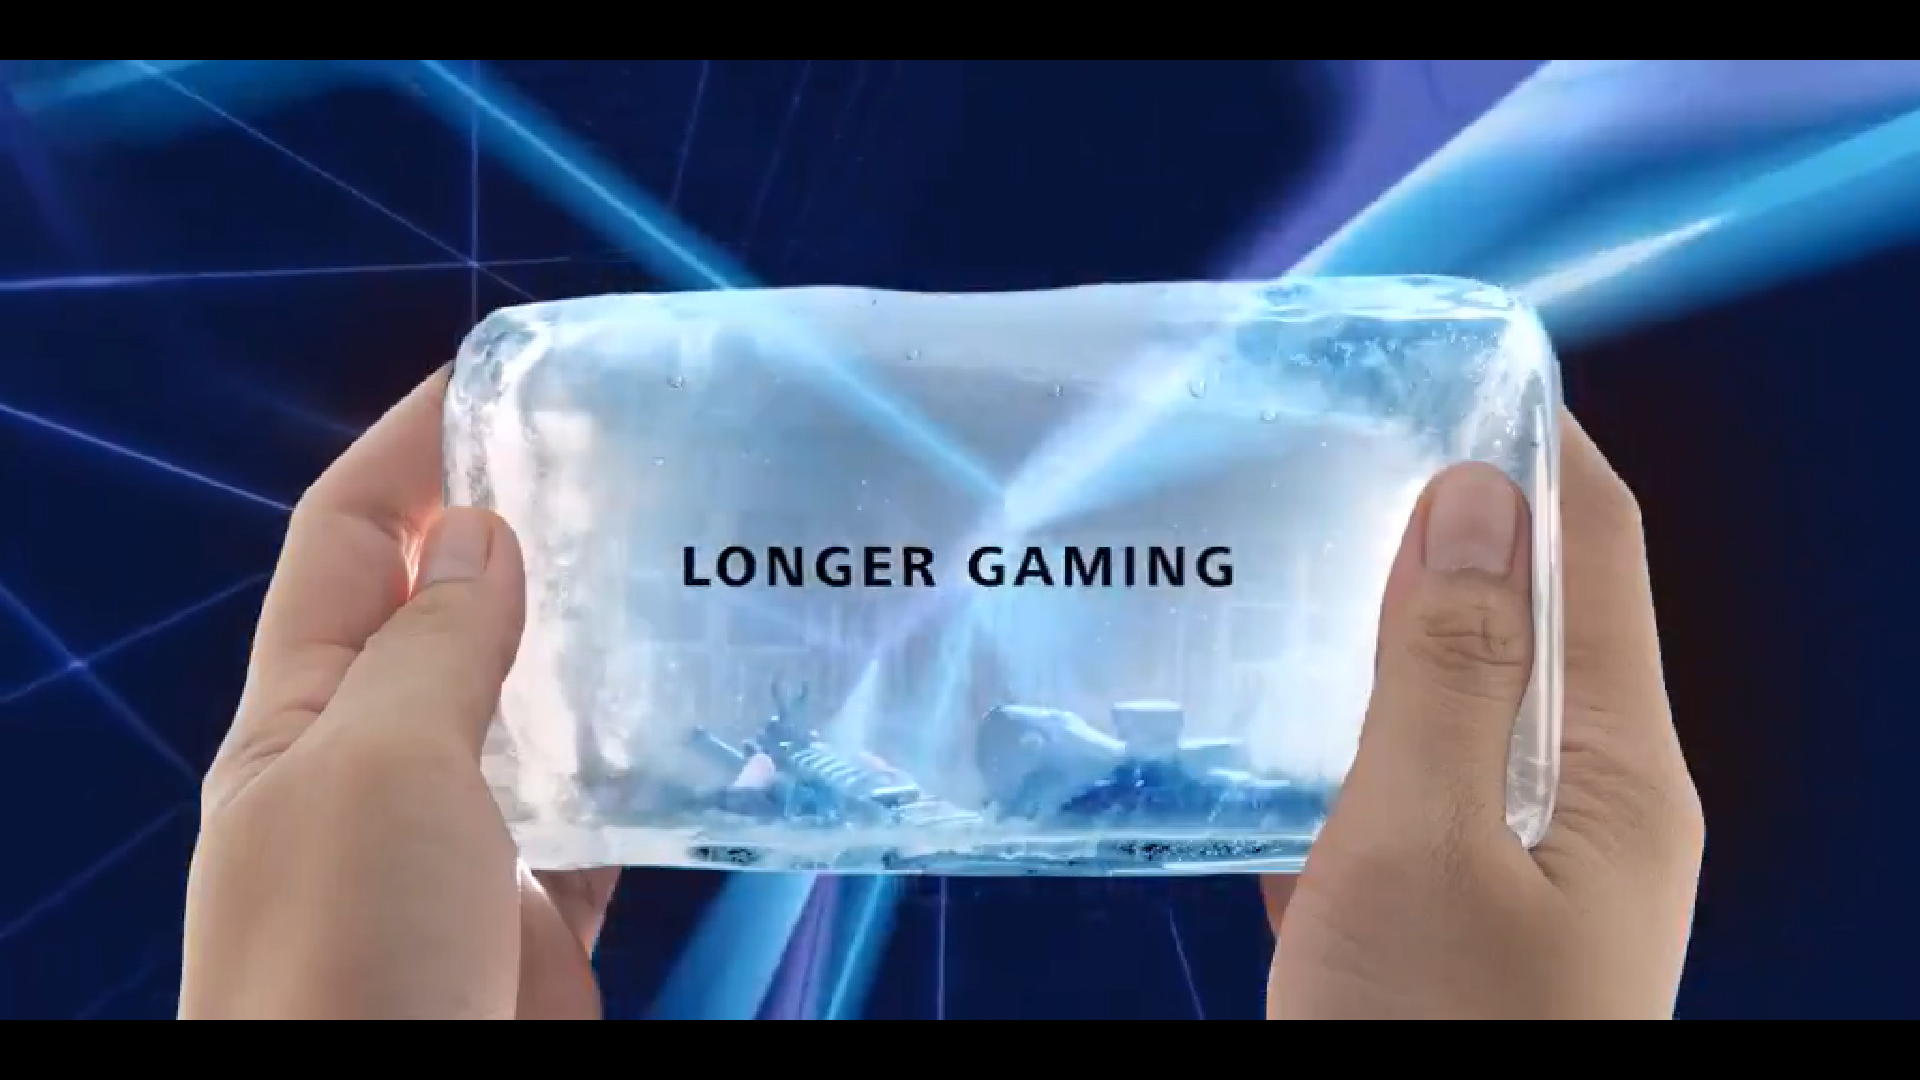 Huawei Mate 20X gaming smartphone got teased officially 16